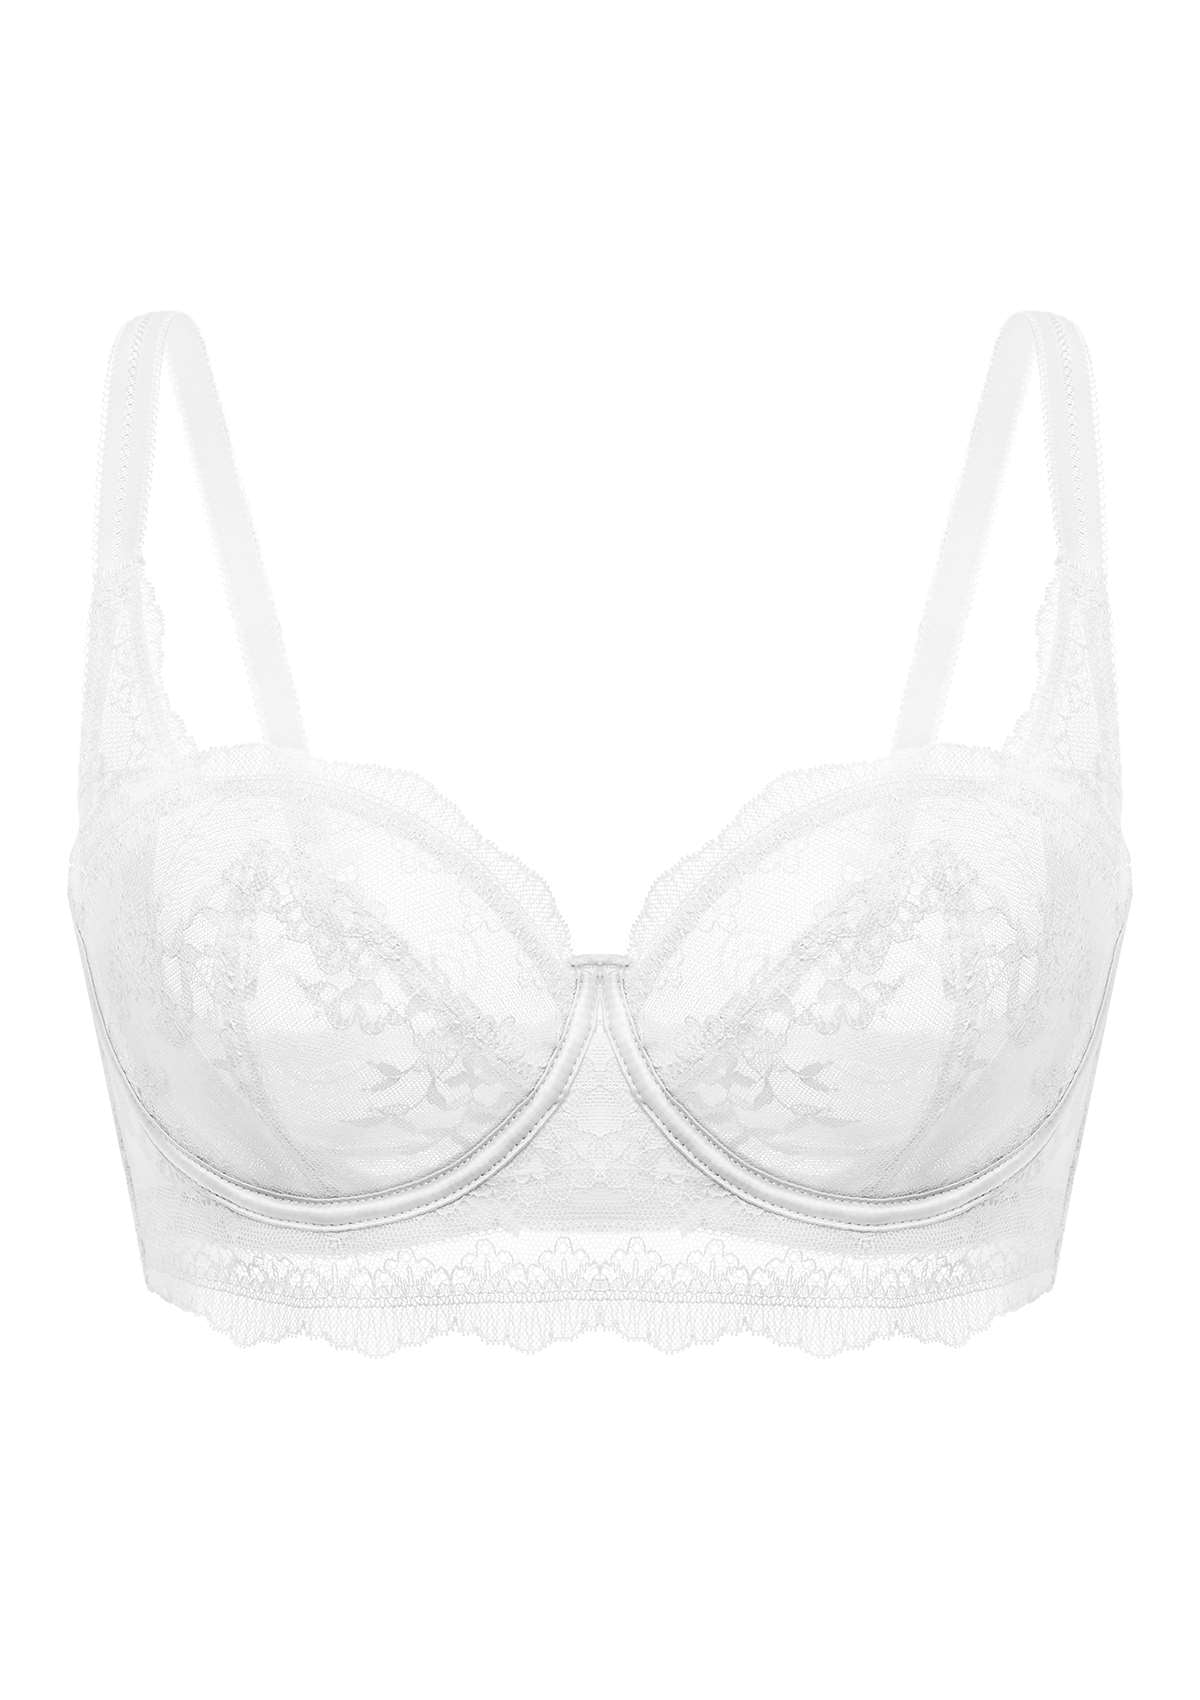 HSIA I Do Floral Lace Bridal Balconette Beautiful Bra For Special Day - White / 34 / DDD/F